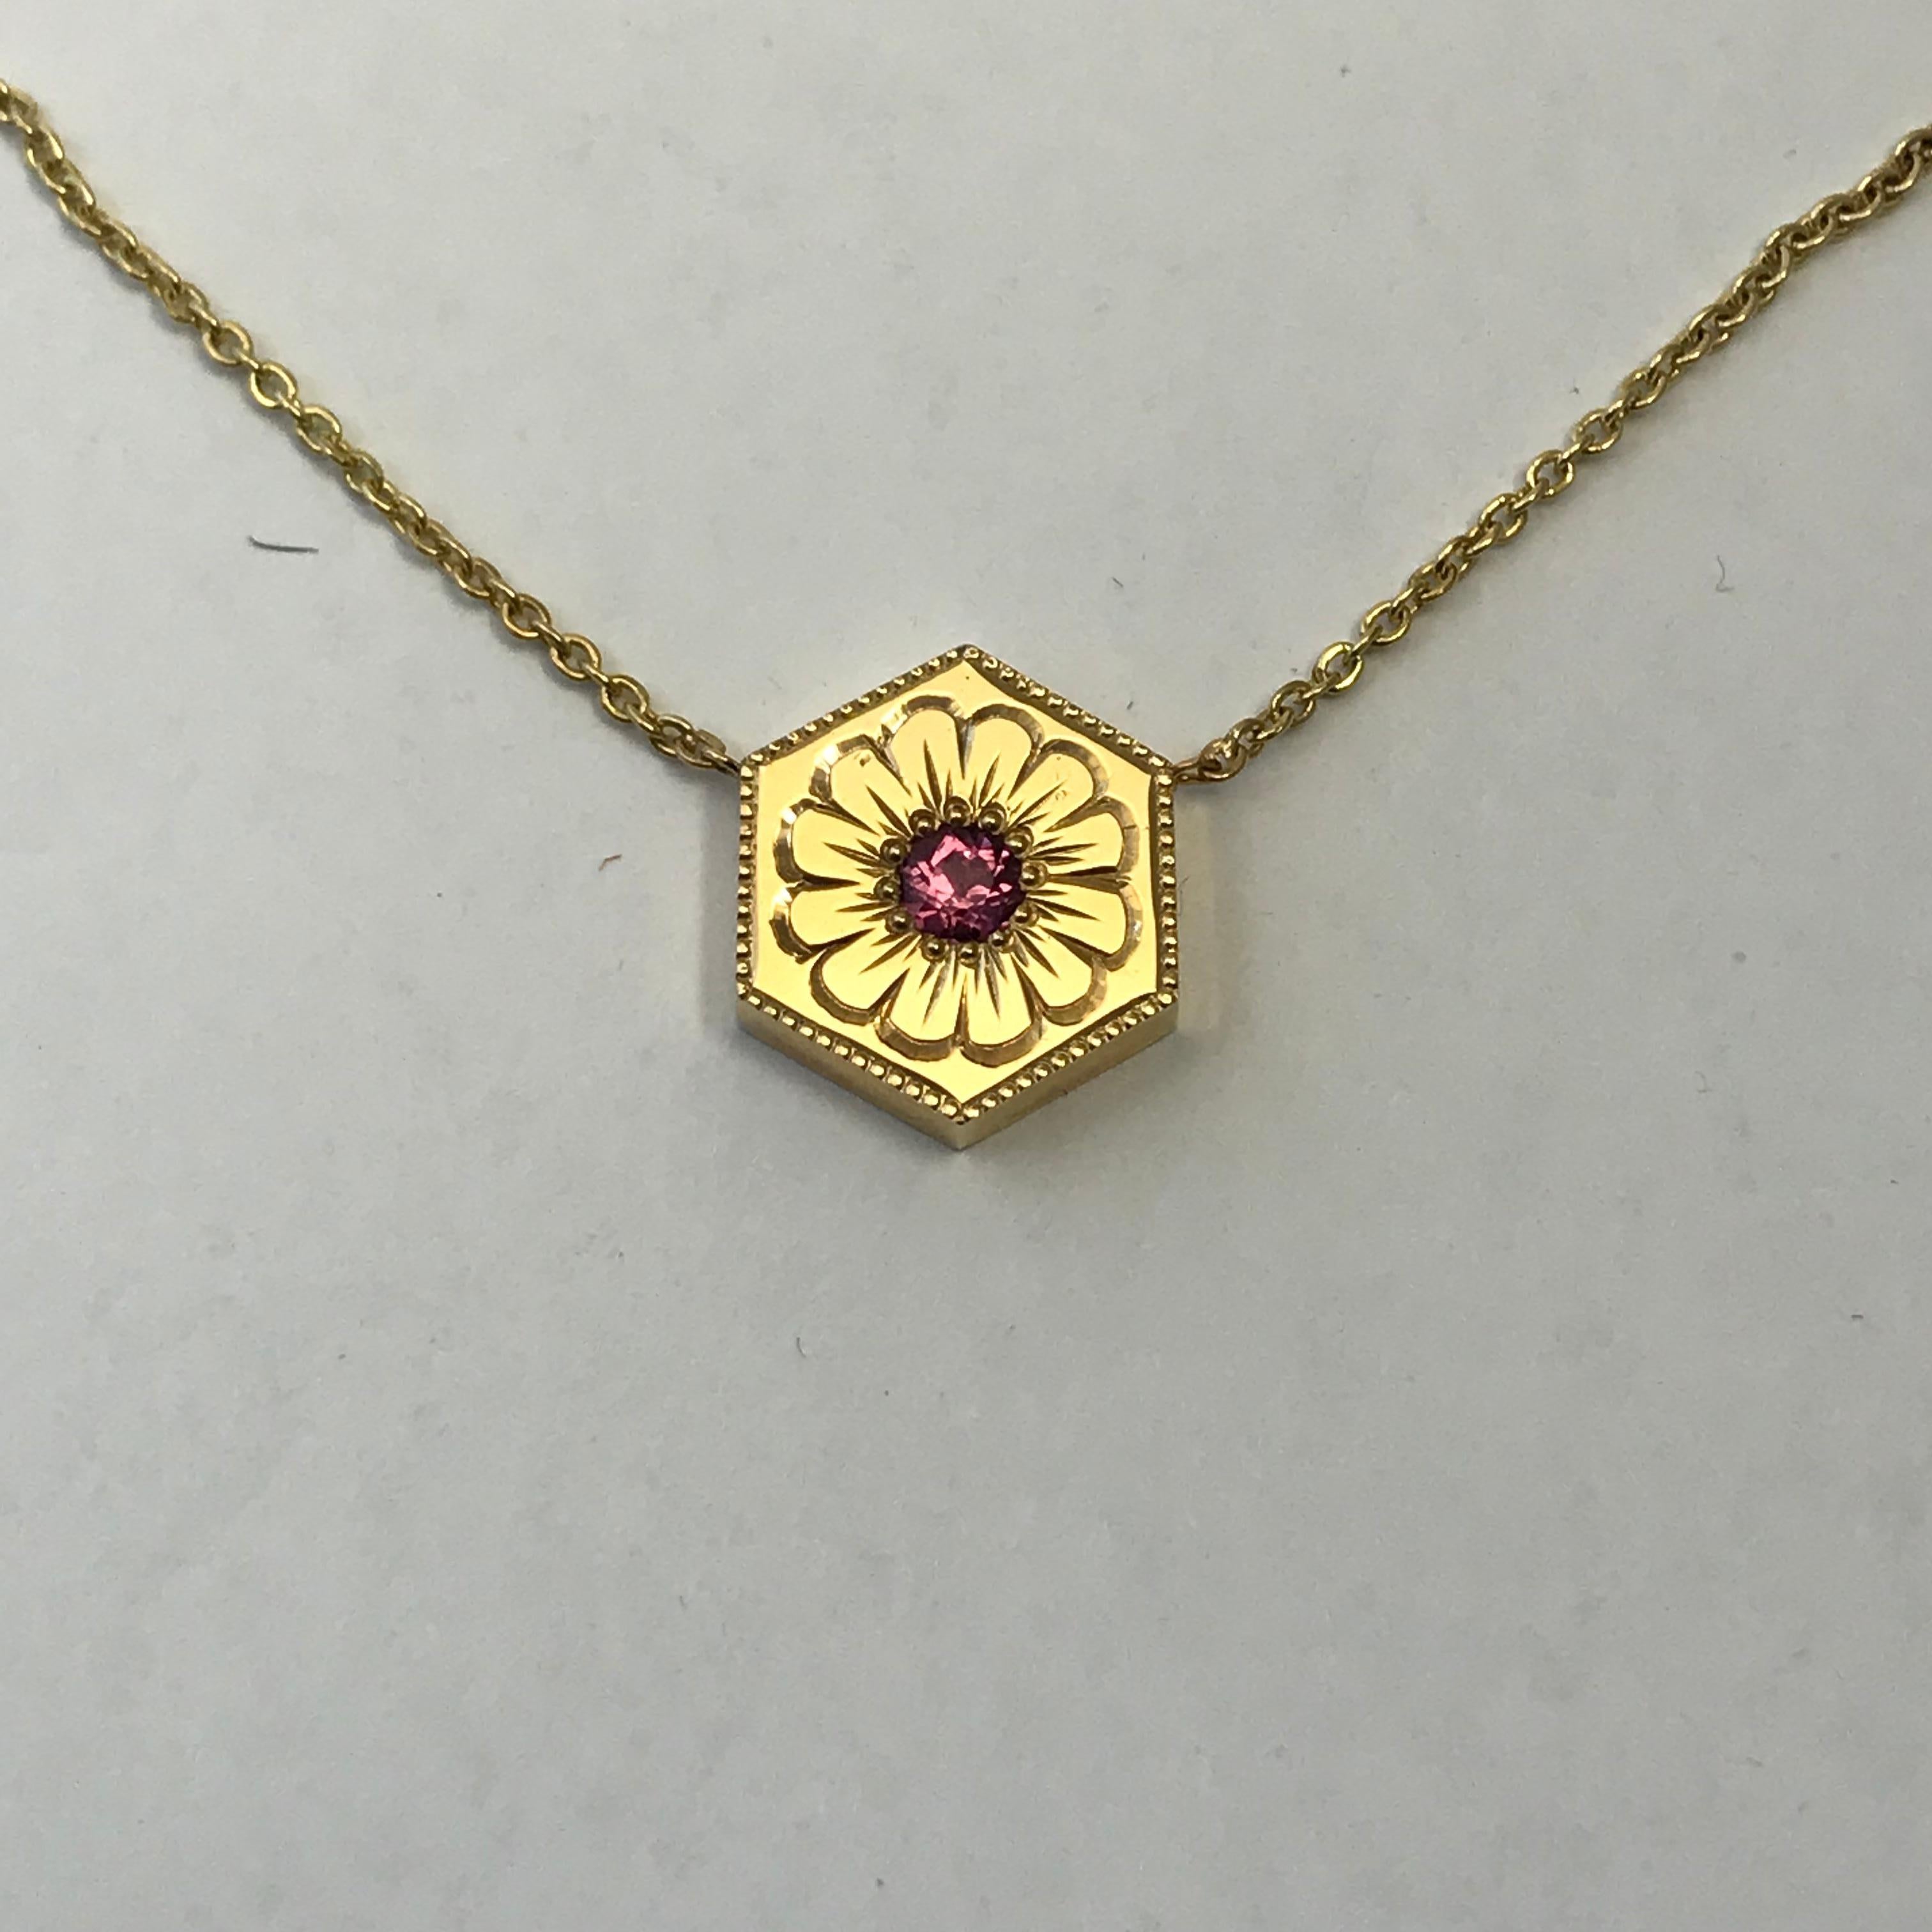 Hexagon Necklace in 14K Gold & Gems-Sapphire

This is a one of a series of unique necklaces. Each one is hand engraved in different styles and different gemstones. 

This beautiful pendant is in the very trendy hexagon style and is set with gems and